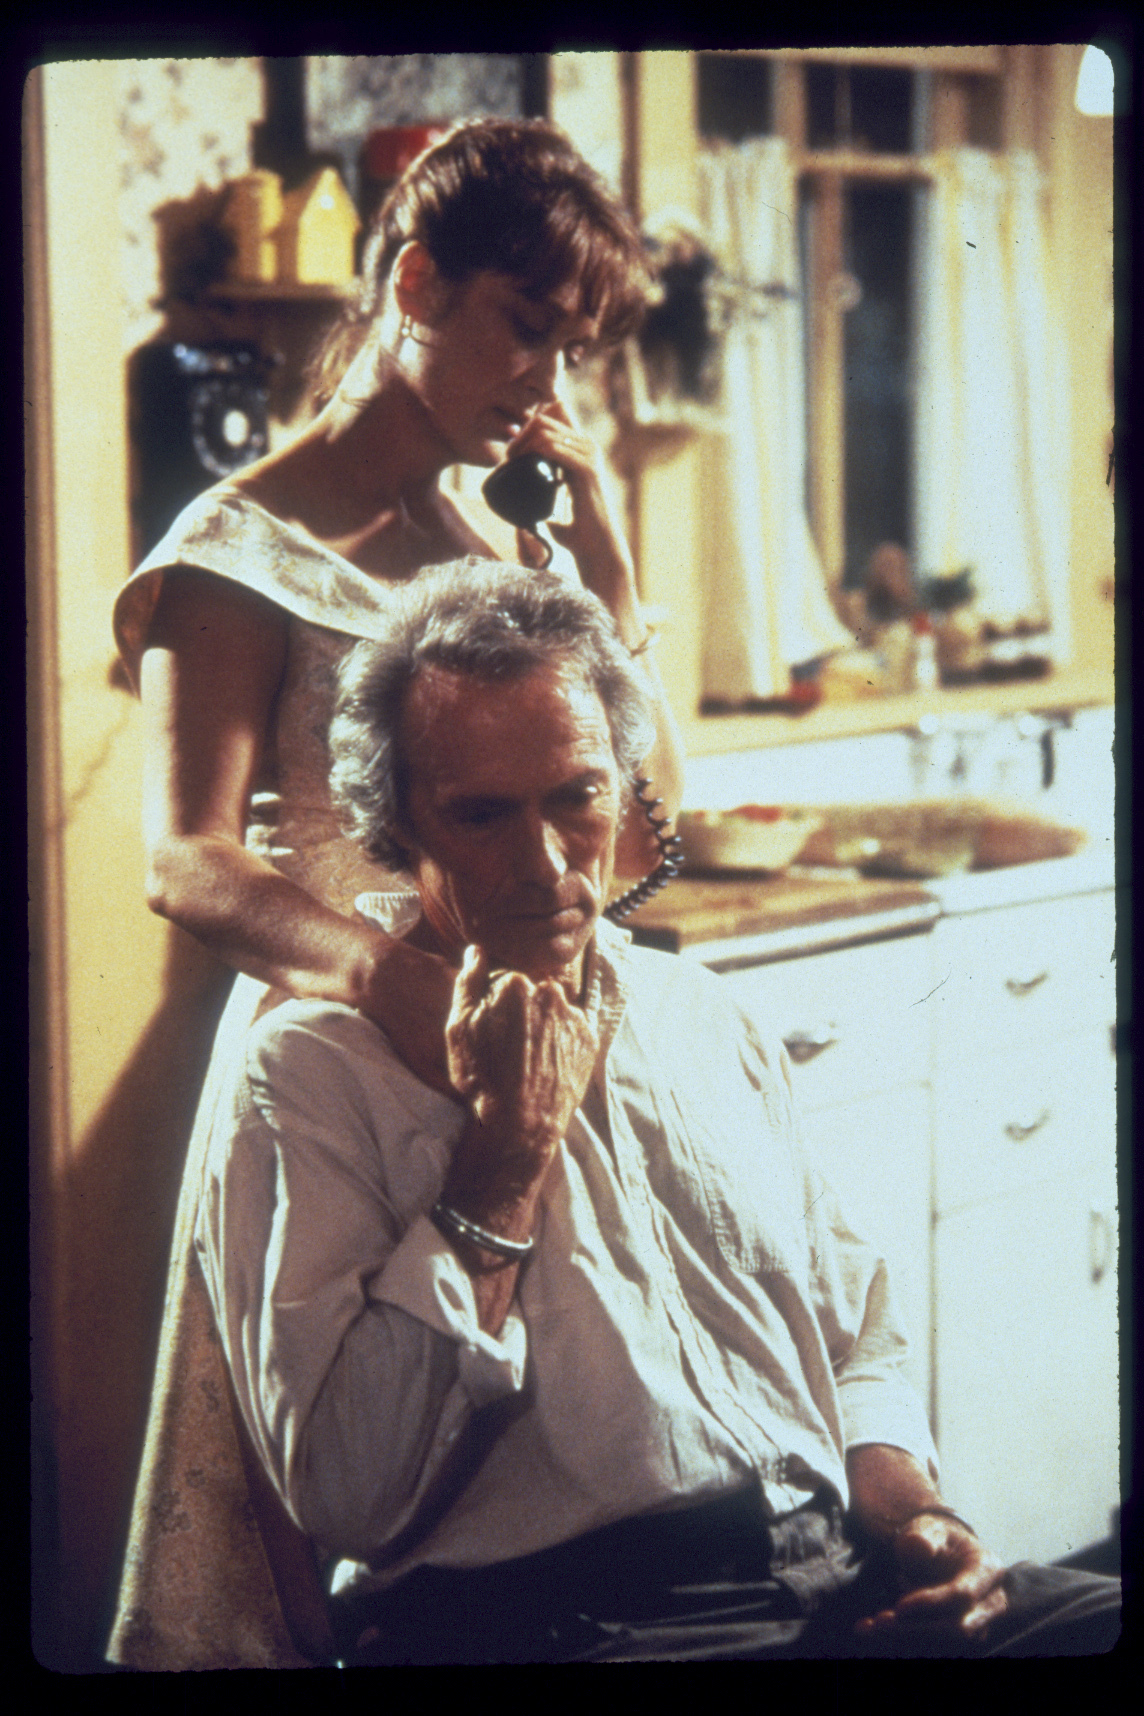 Still of Clint Eastwood and Meryl Streep in Medisono grafystes tiltai (1995)